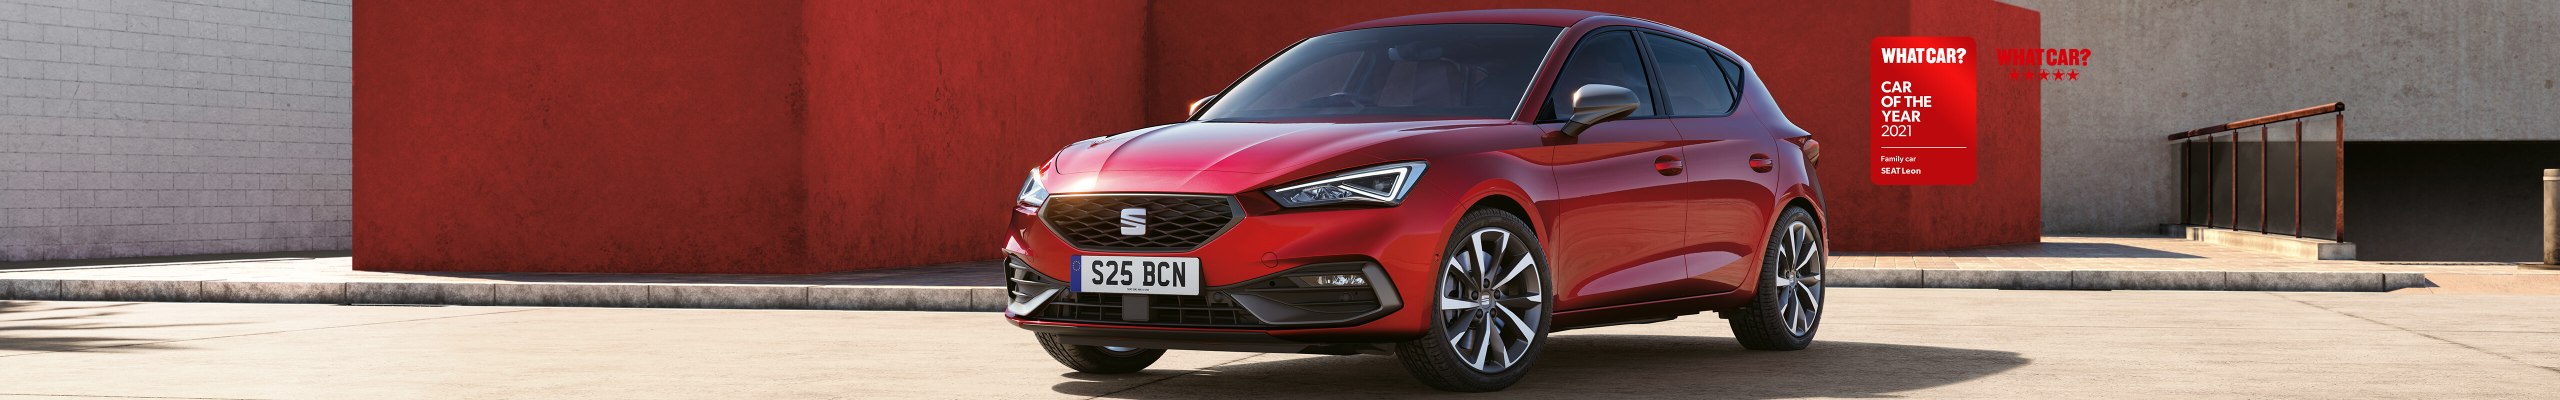 SEAT takes two at What Car? Awards 2021